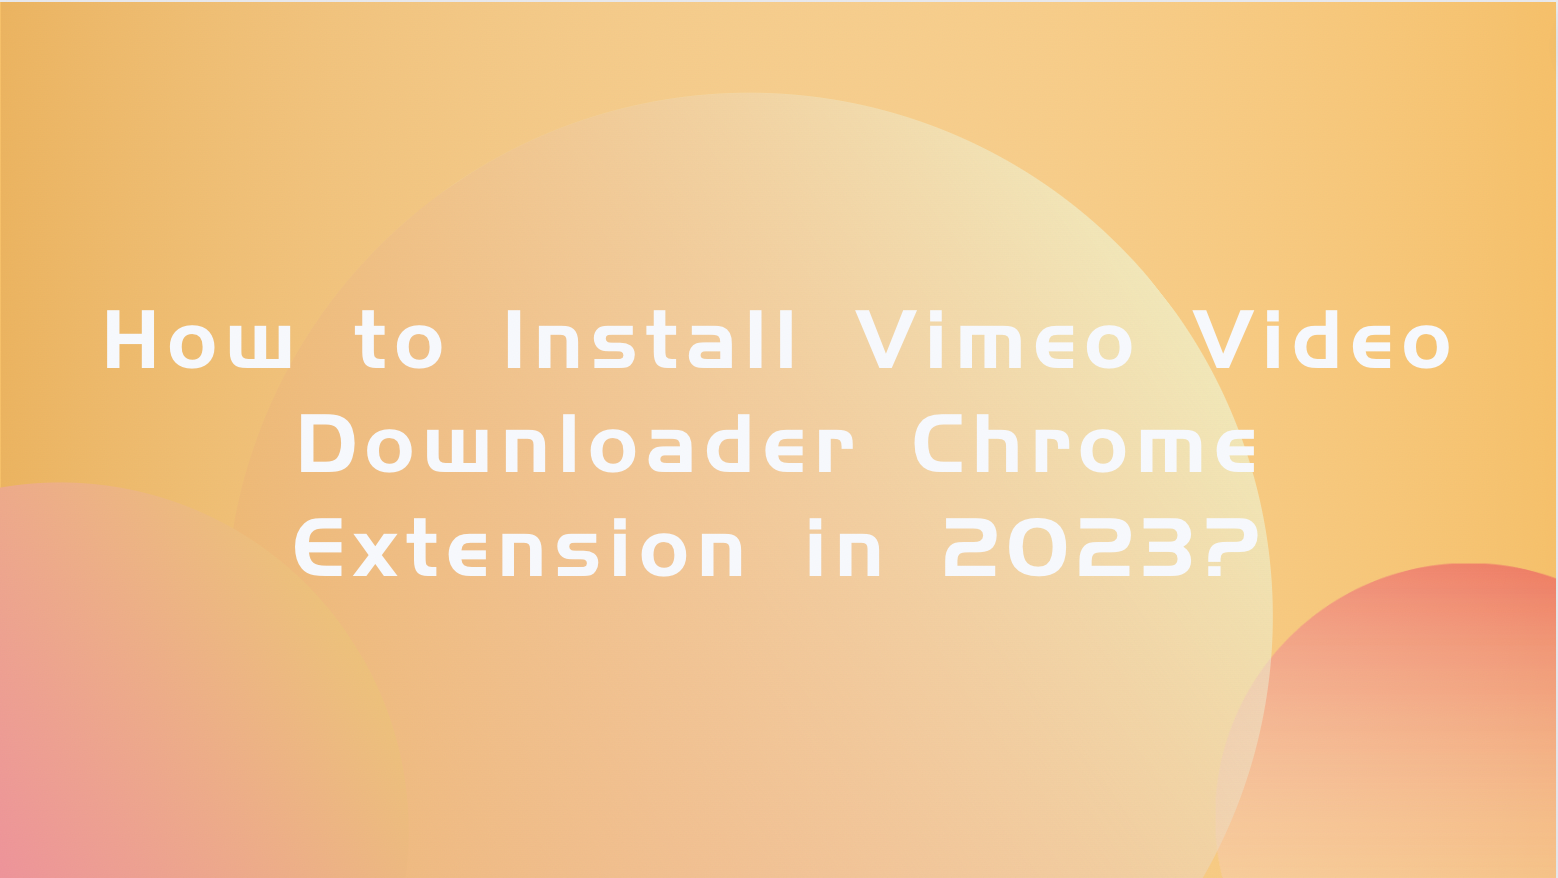 How to Install Vimeo Video Downloader Chrome Extension in 2023?